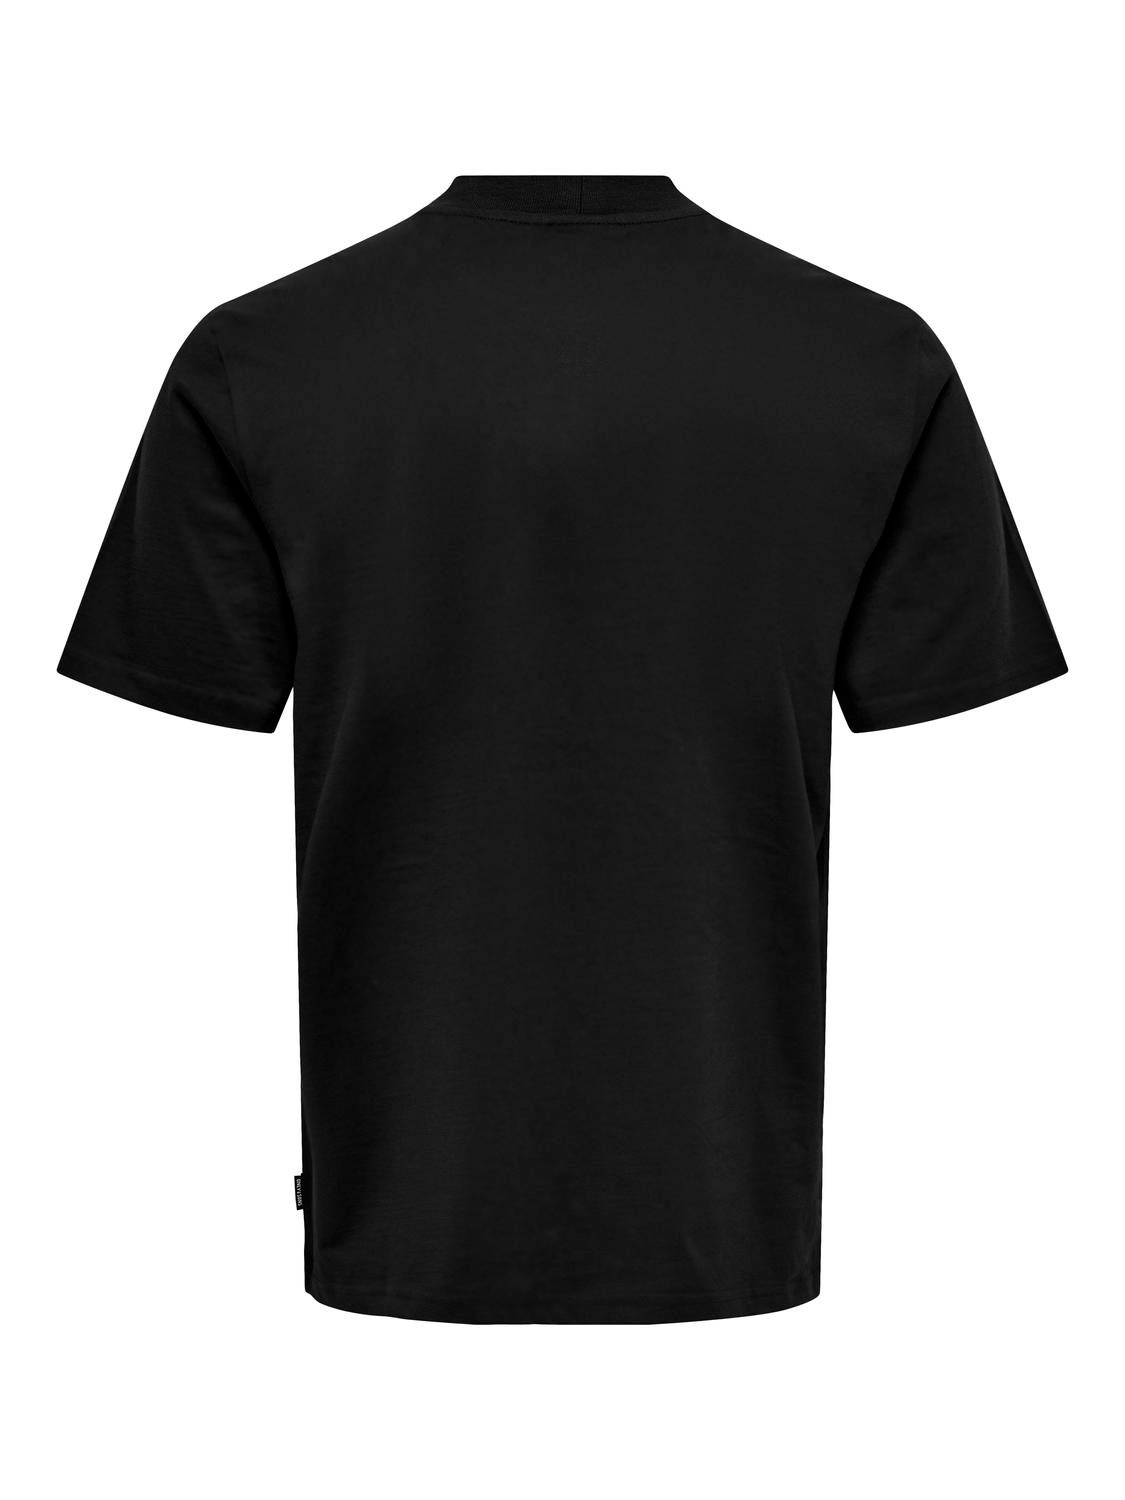 ONLY & SONS Regular Fit Round Neck T-Shirt -Black - 22027086